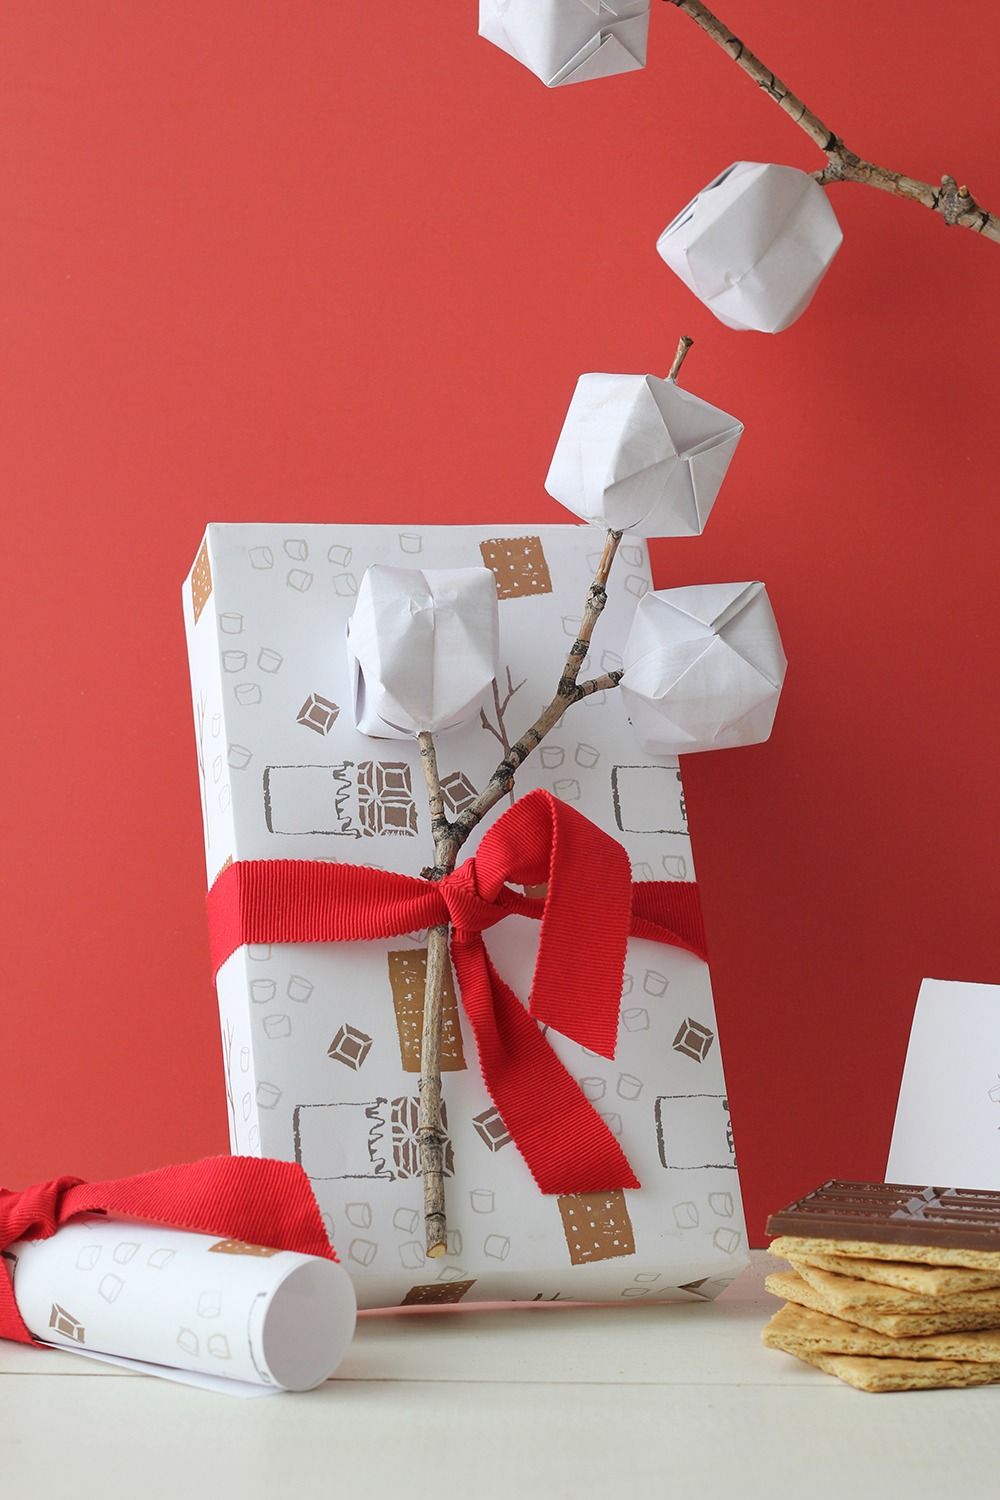 DIY Christmas gift wrap ideas - Handmade bows, gift bags and toppers